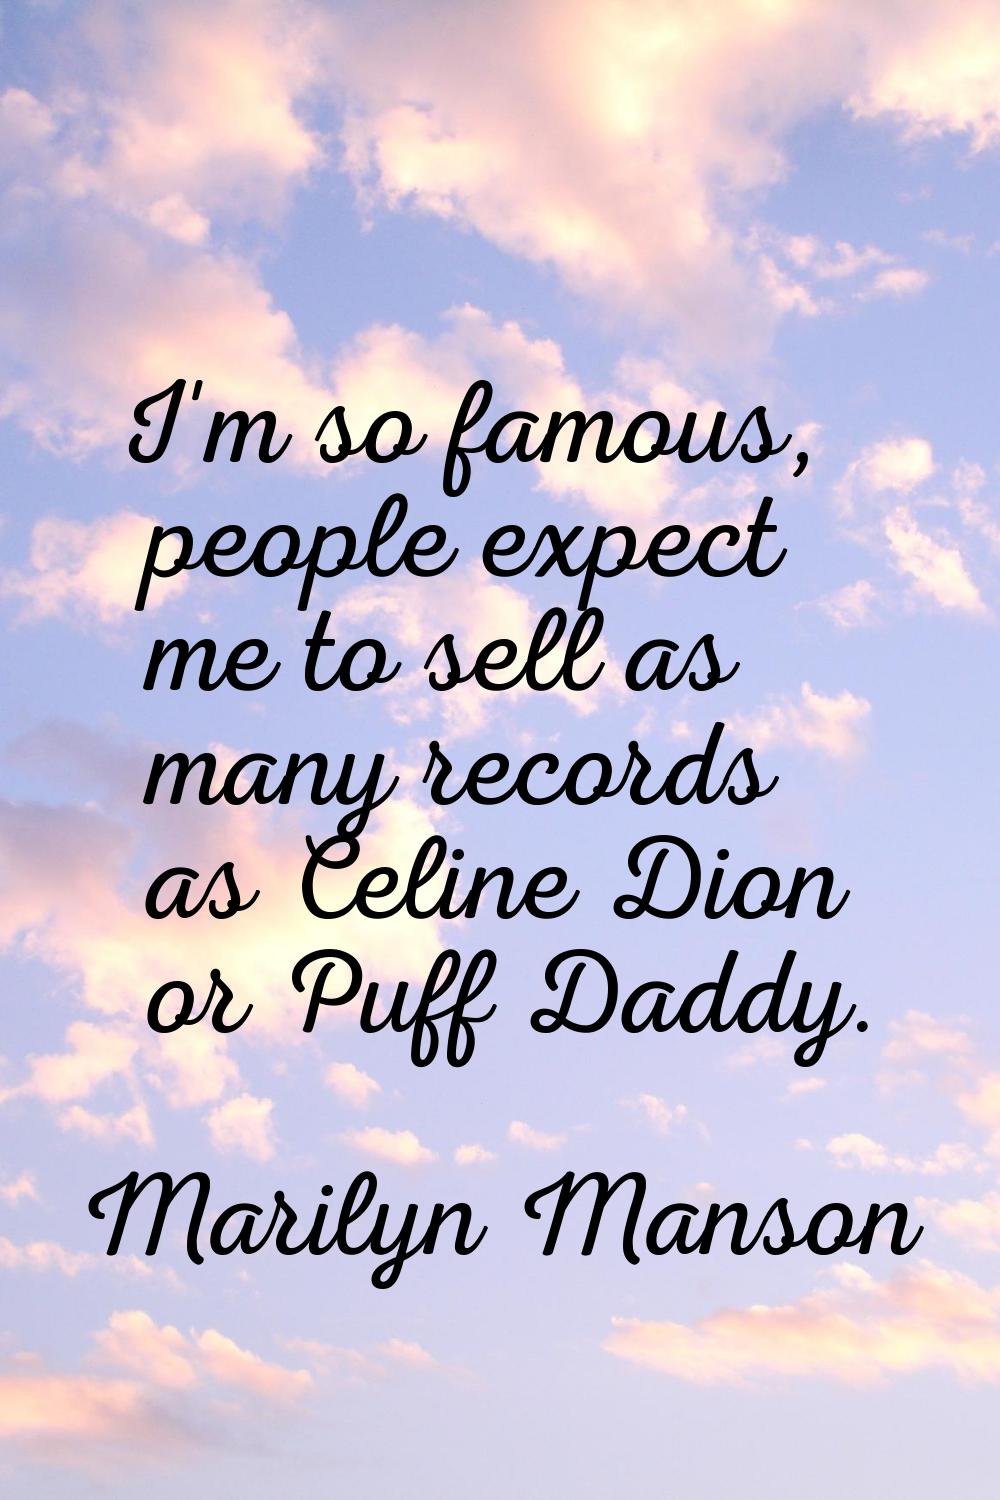 I'm so famous, people expect me to sell as many records as Celine Dion or Puff Daddy.